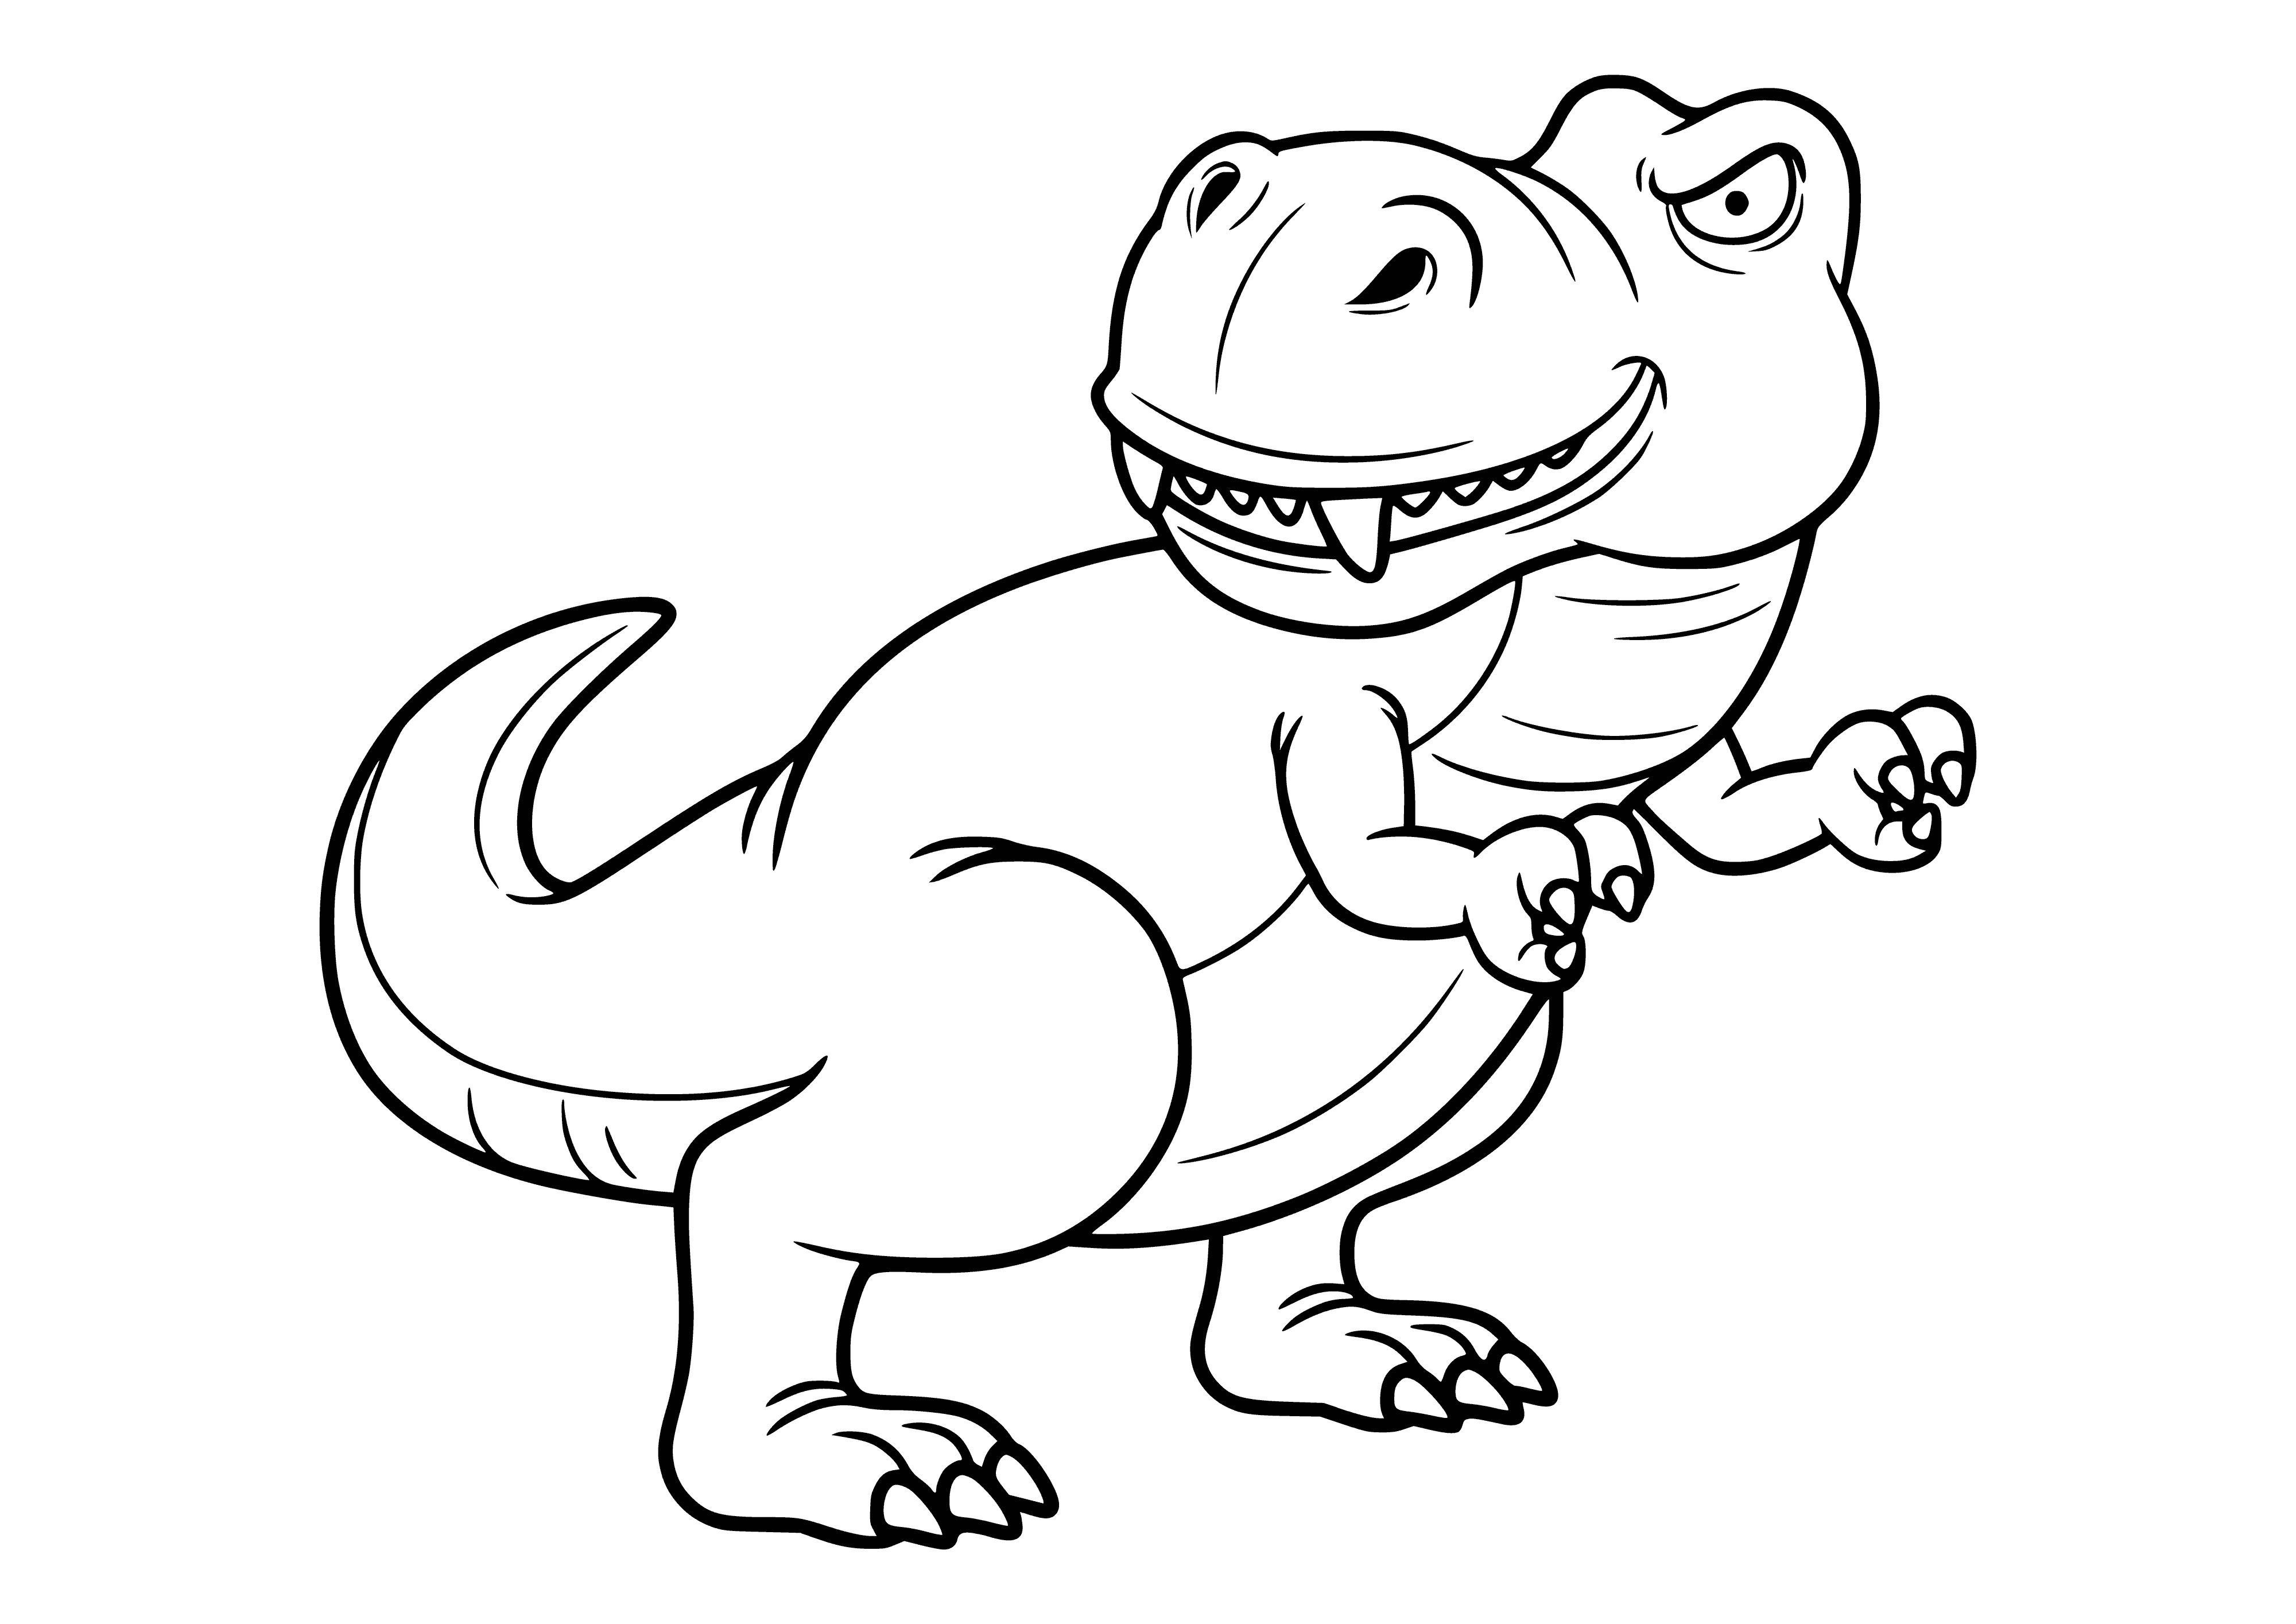 coloring page: T-rex coloring page of a big reptile with sharp teeth, small arms, long tail, body scales and brown spots on a green body.